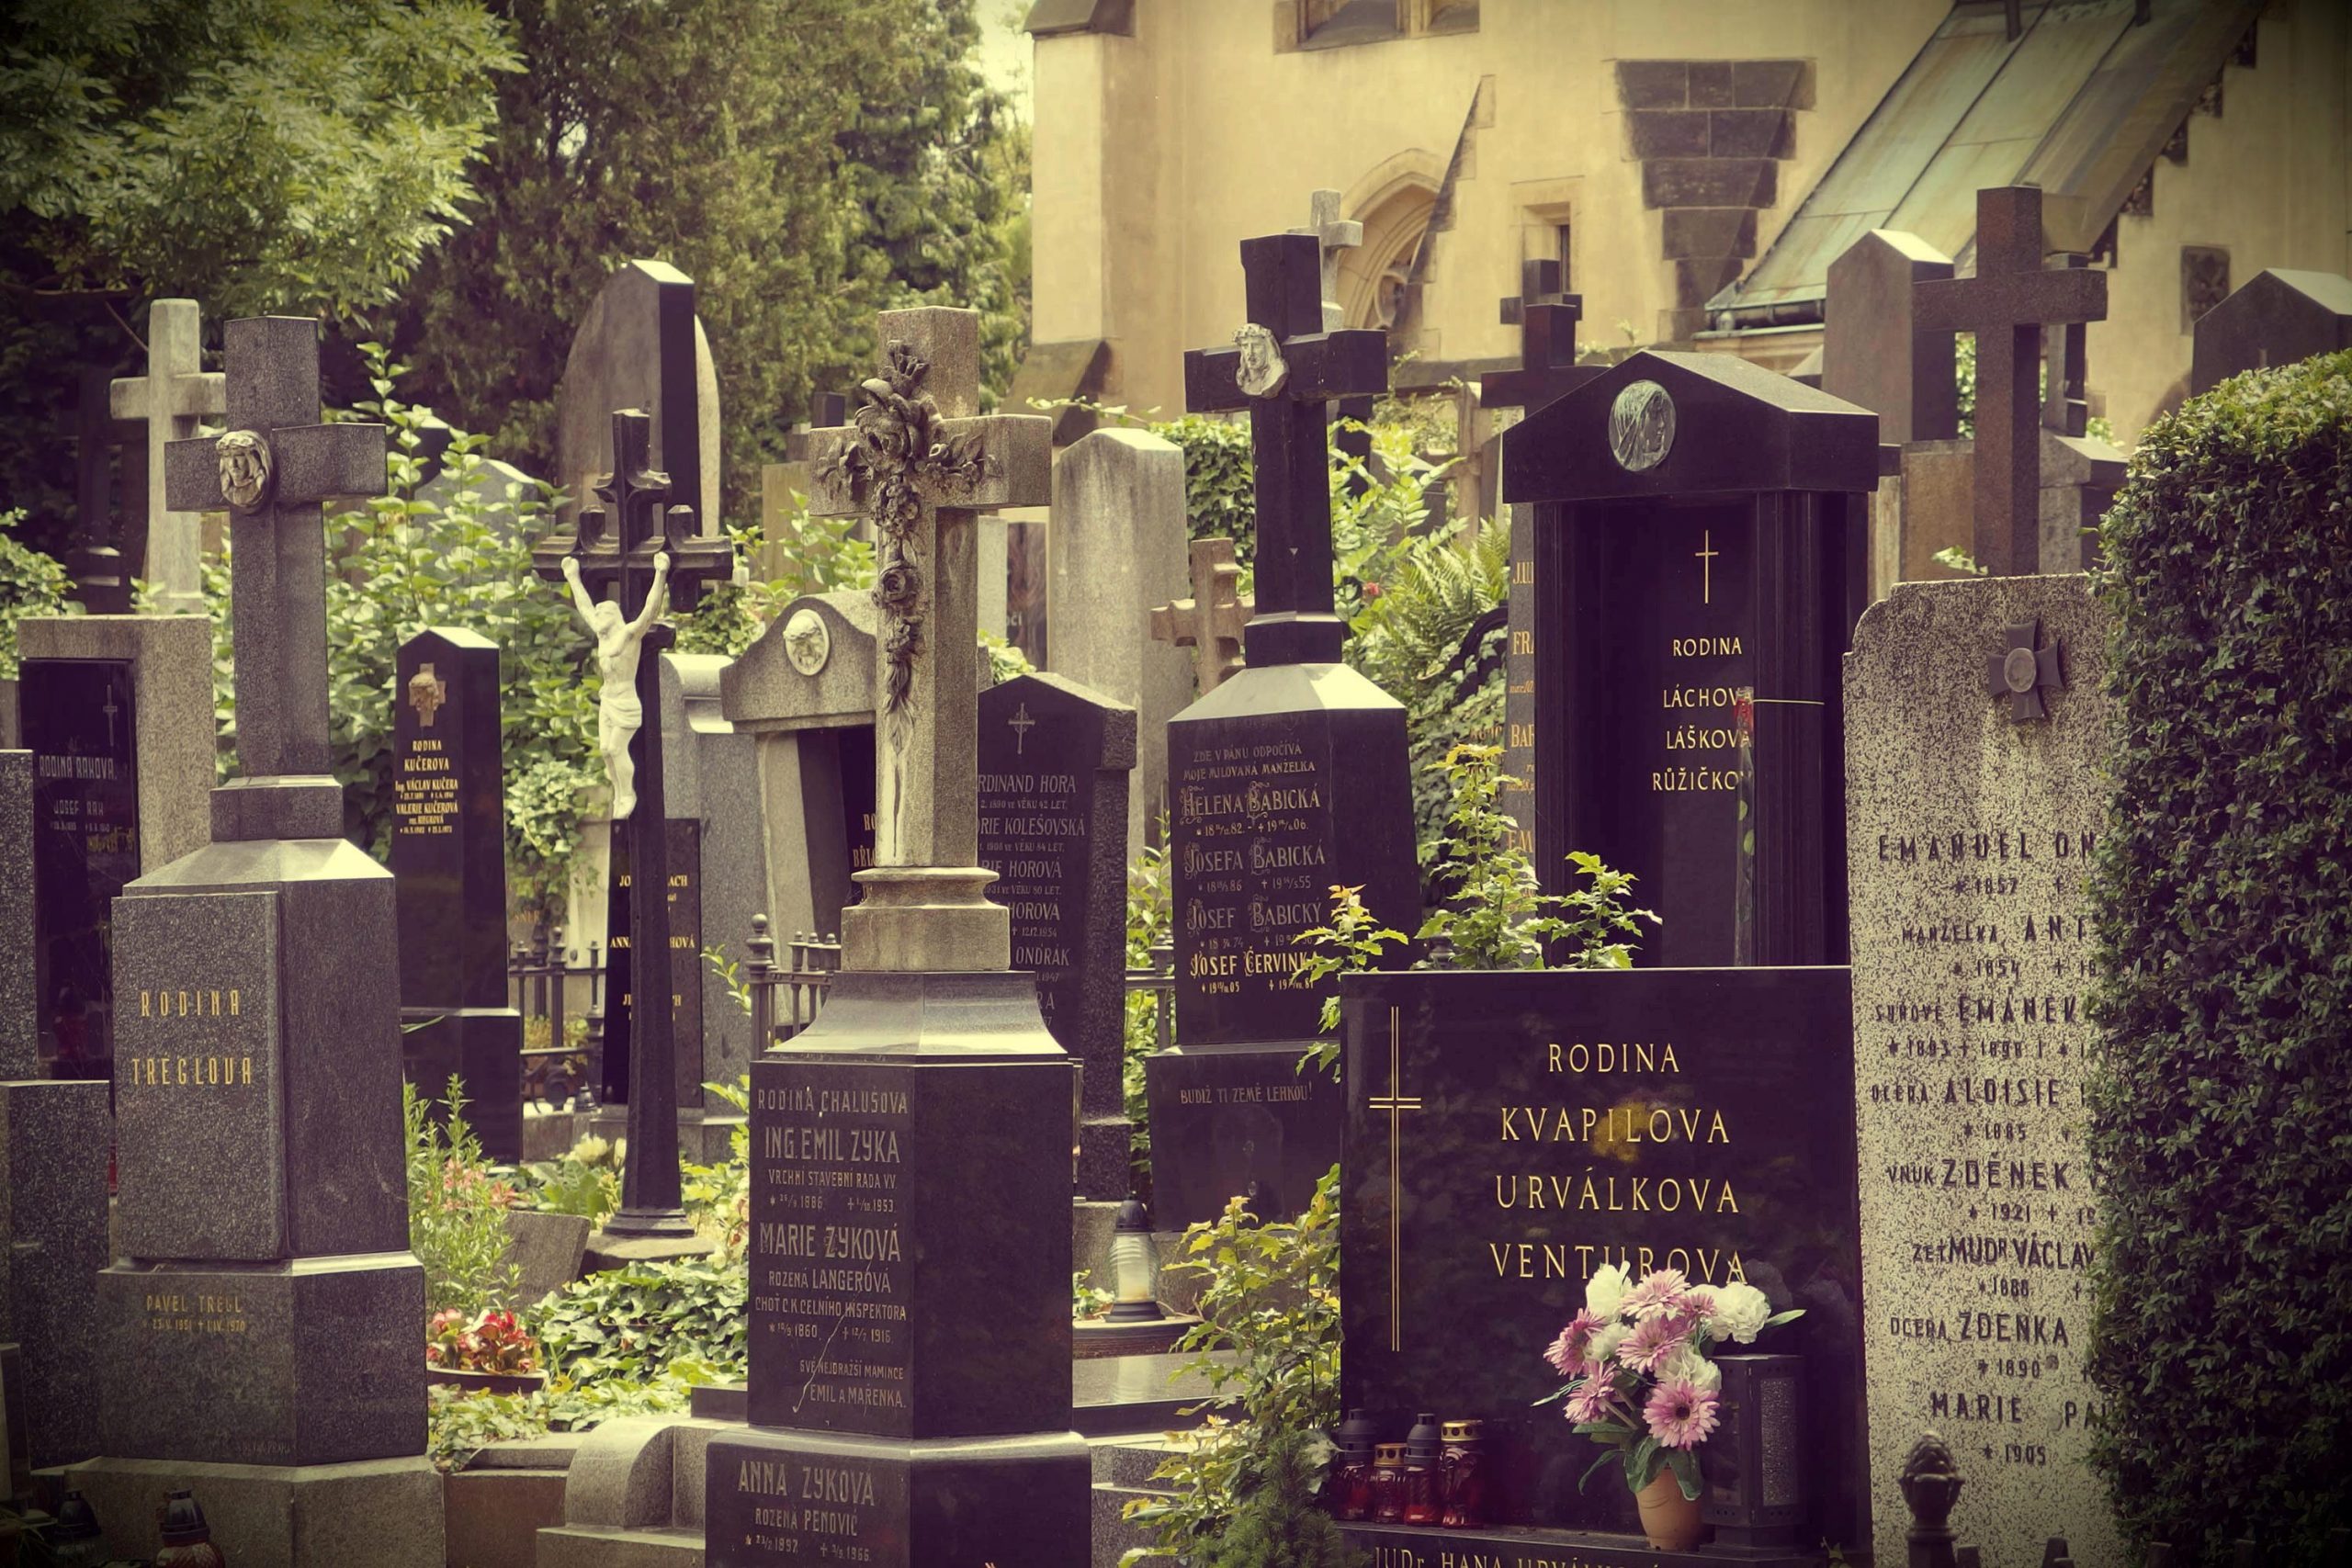 crowded cemetery with headstones very close together